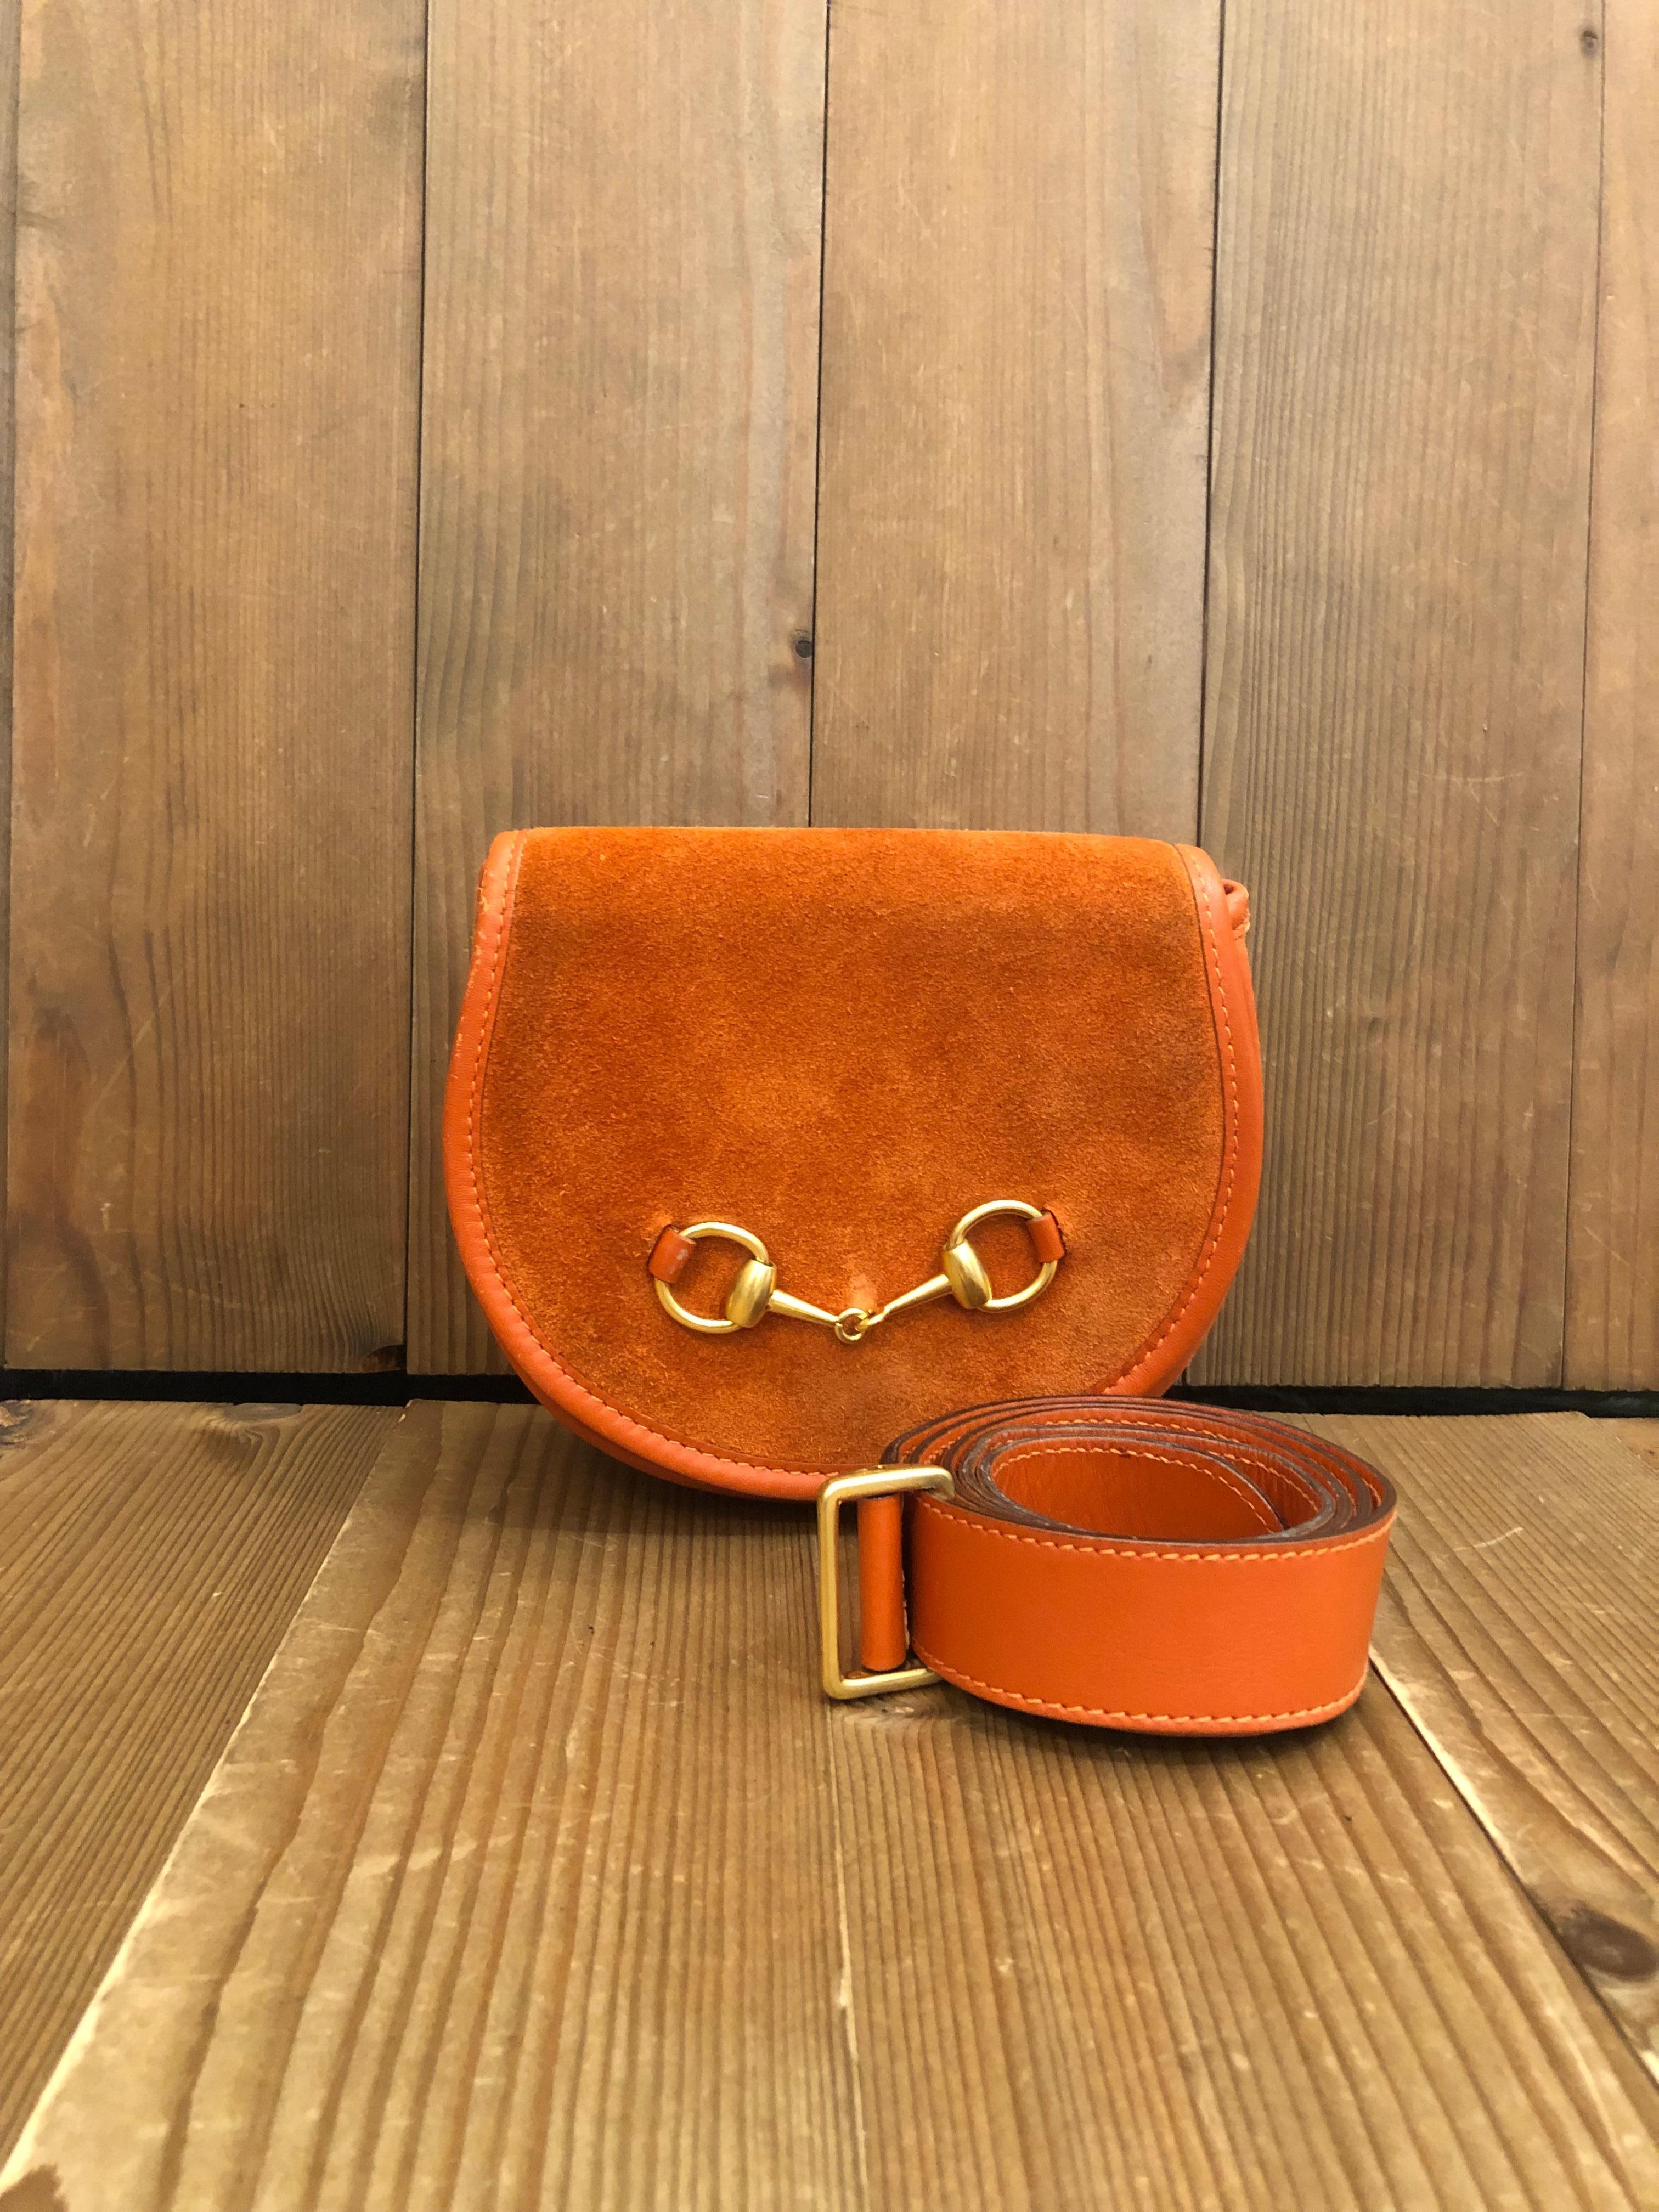 This vintage GUCCI belt bag is crafted of suede and calf leather in orange featuring a gold toned horsebit. This Gucci belt bag comes with a detachable belt of the same leather. Front flap magnetic snap closure opens to a beige coated interior which